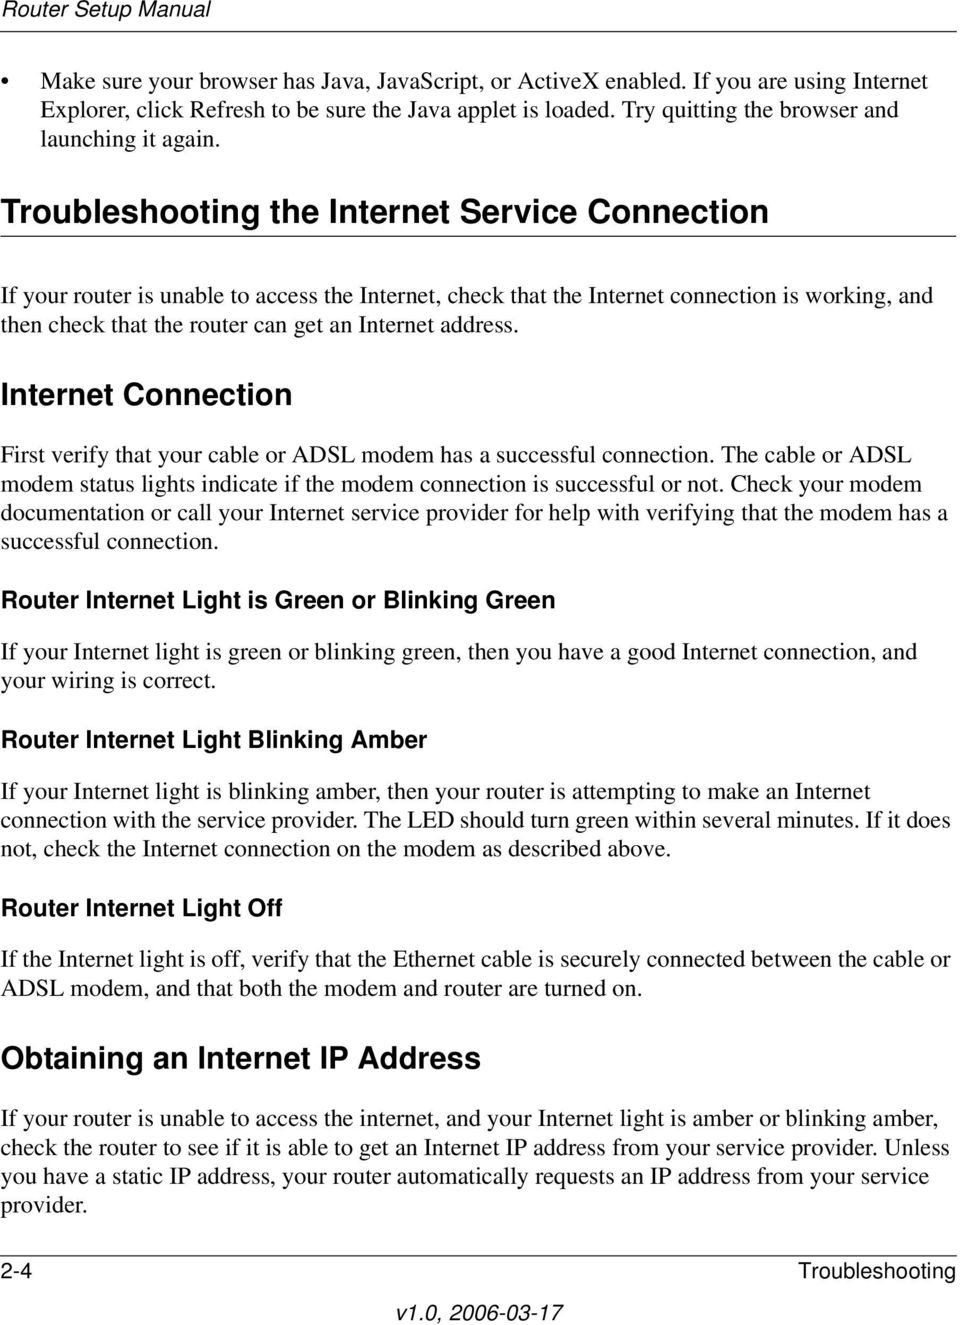 Troubleshooting the Internet Service Connection If your router is unable to access the Internet, check that the Internet connection is working, and then check that the router can get an Internet